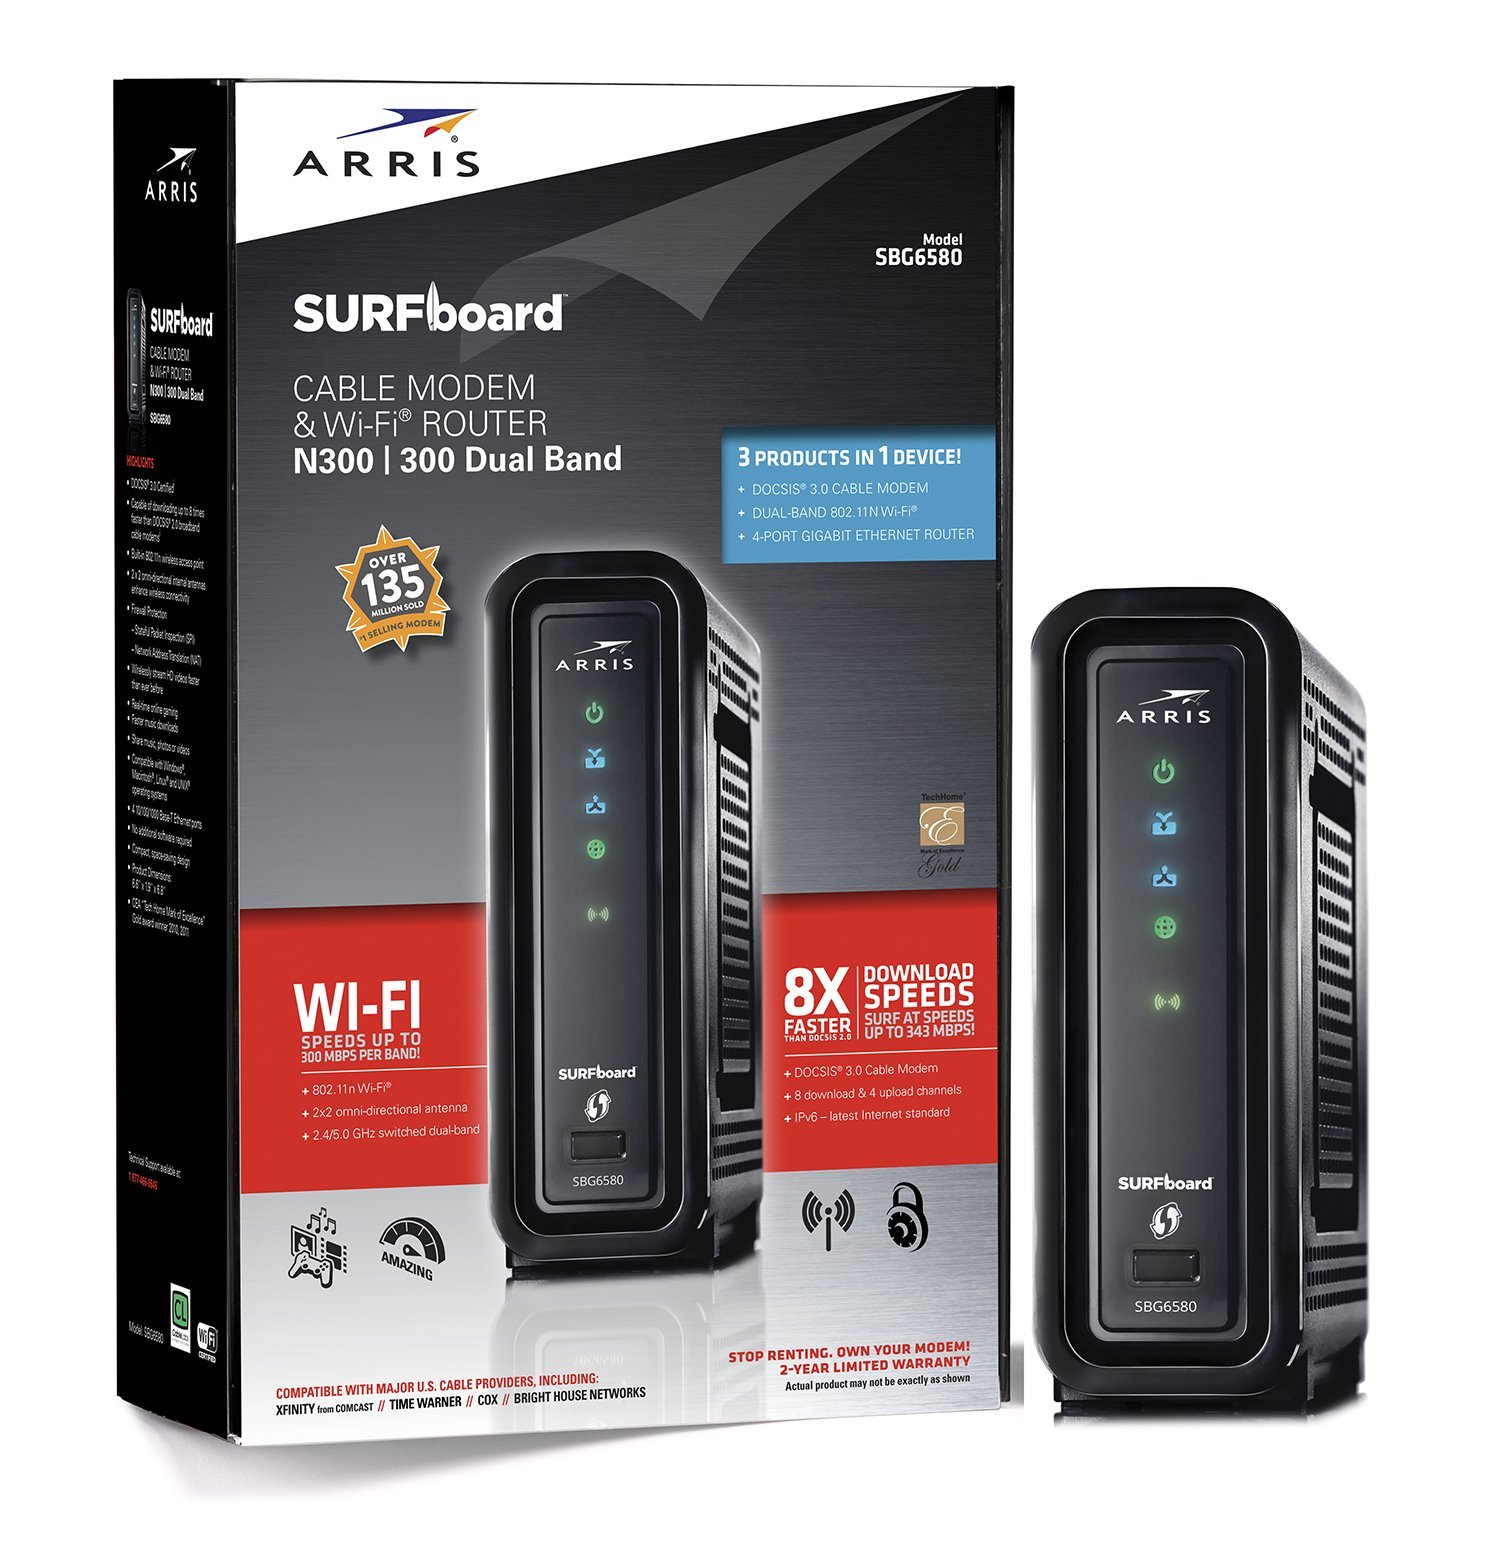 ARRIS SURFboard DOCSIS 3.0 Cable Modem / N600 Wi-Fi Dual-Band Router. Approved for XFINITY Comcast, Cox, Charter and most other Cable Internet providers for plans up to 150 Mbps.(SBG6580) - image 1 of 9